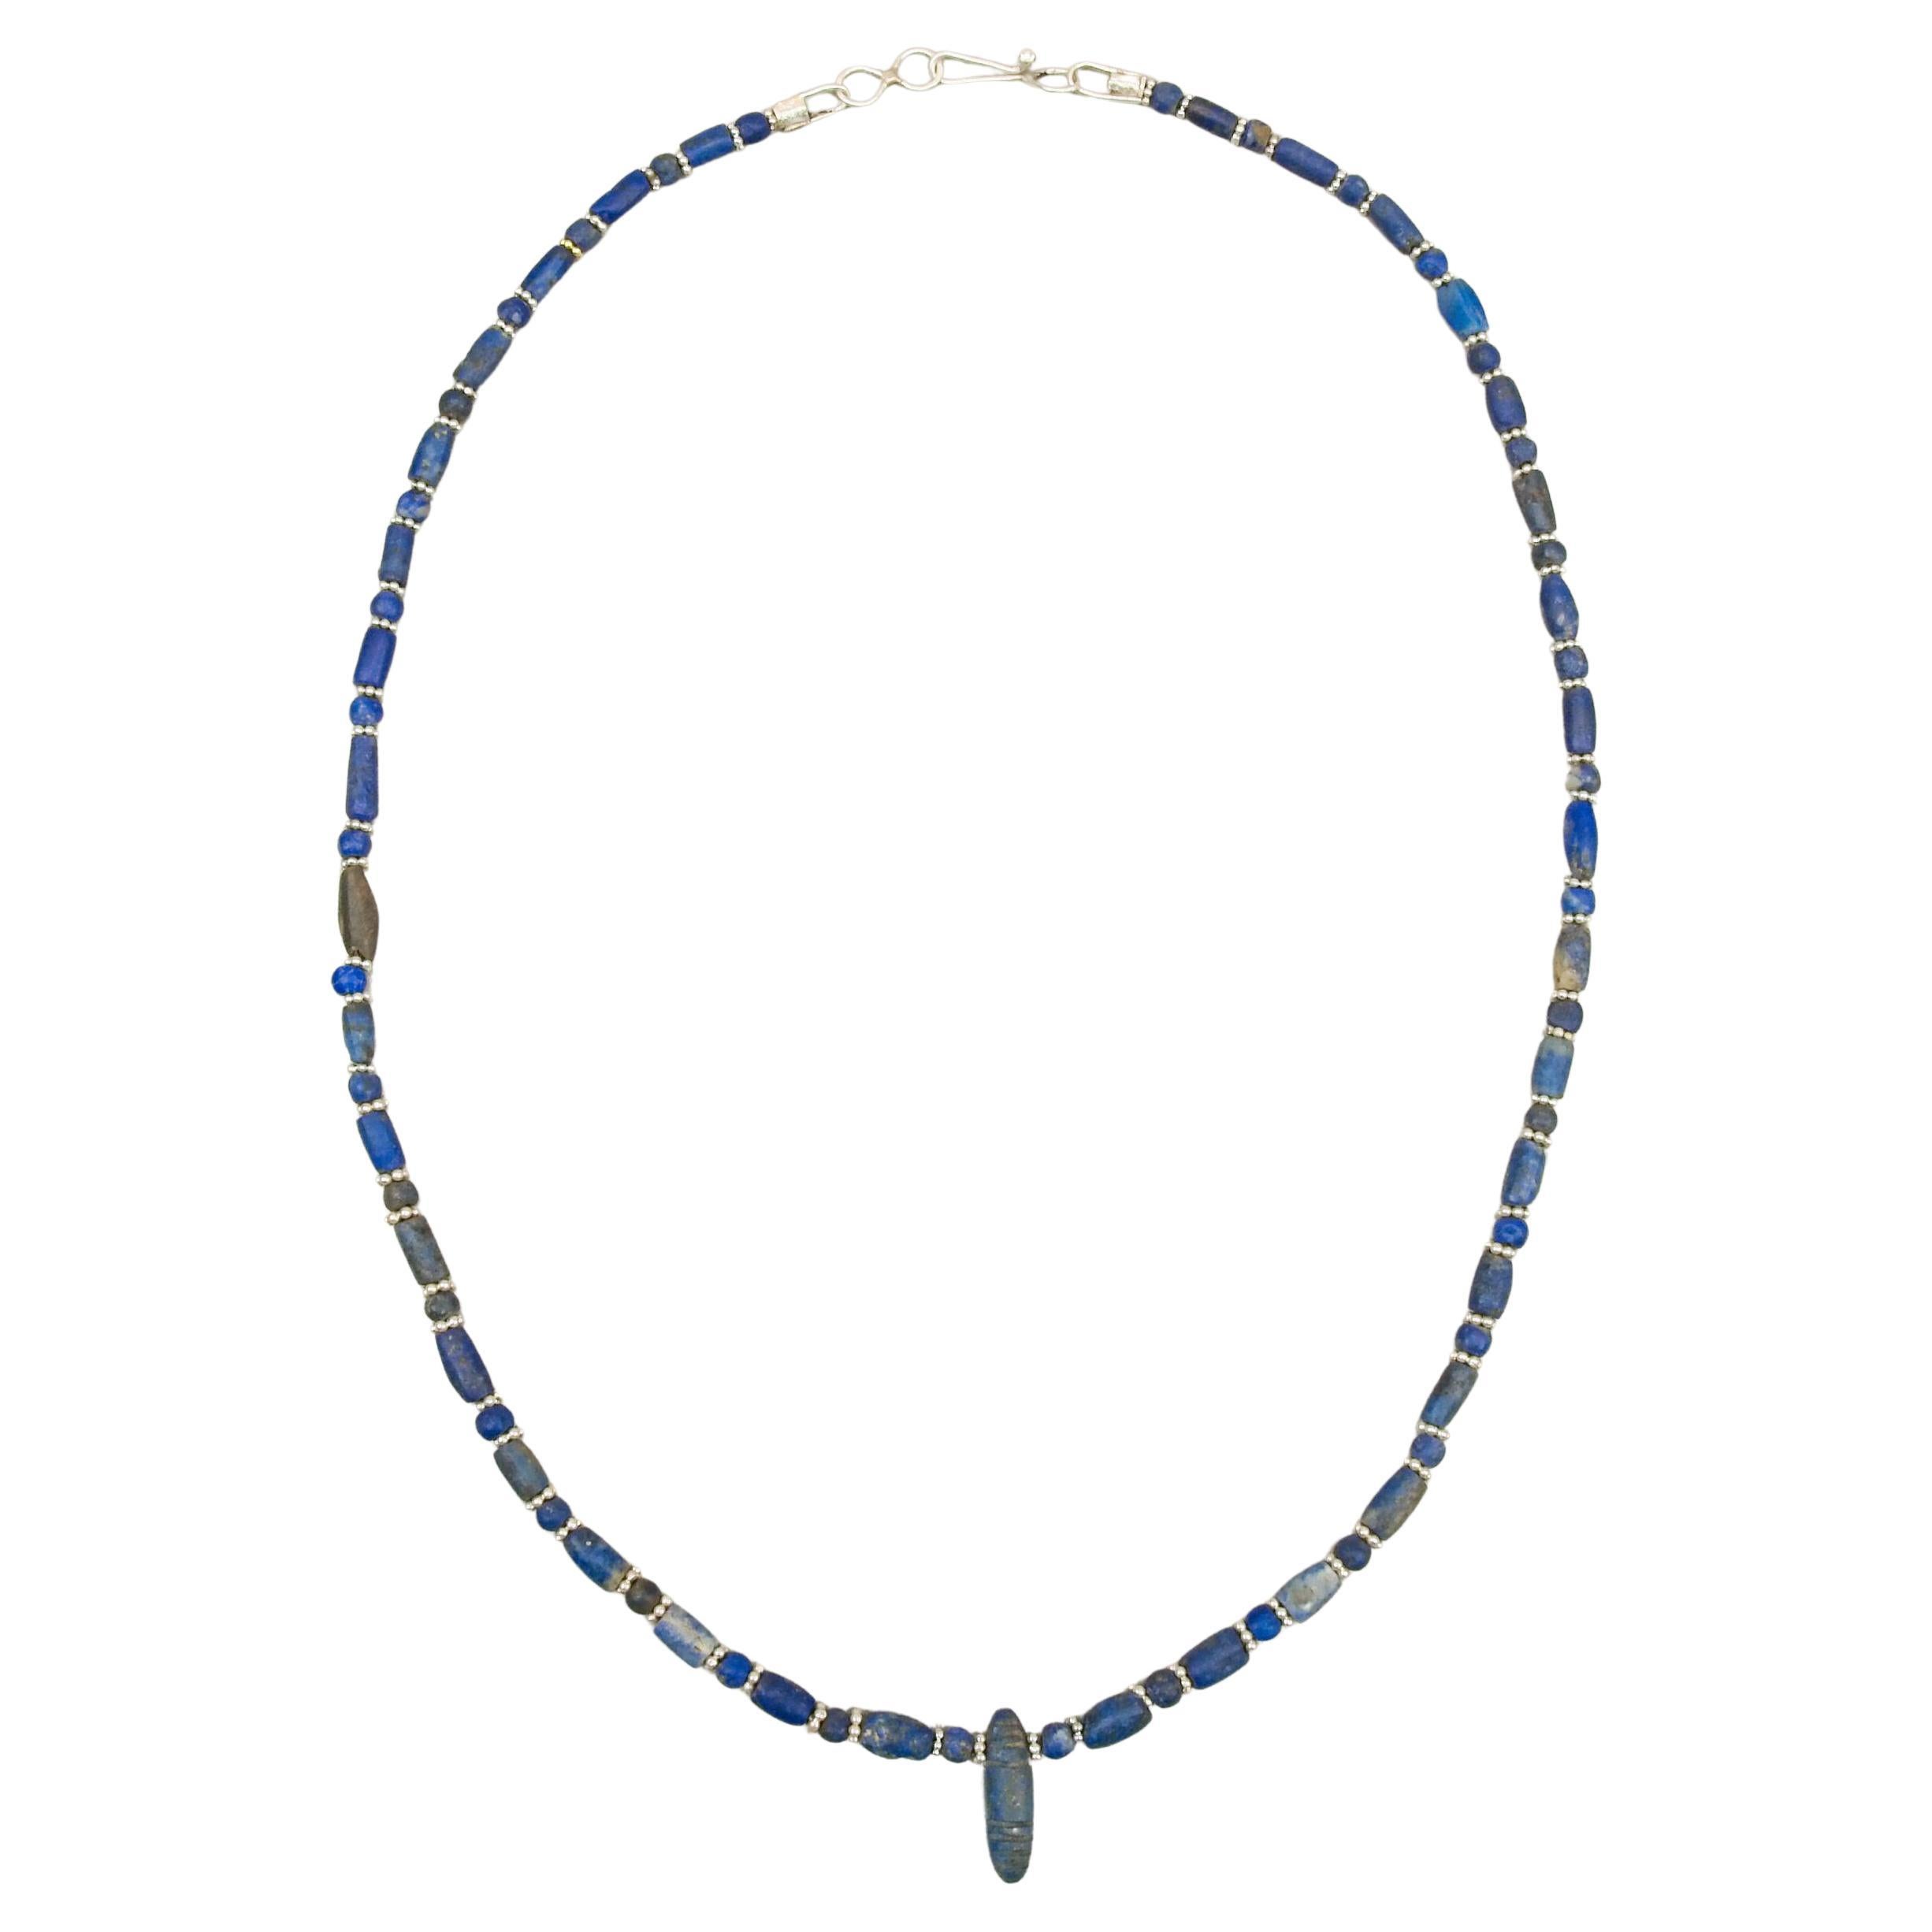 Ancient Lapis Lazuli Beads, Caterpillar Pendant with Granulated Silver Spacers For Sale